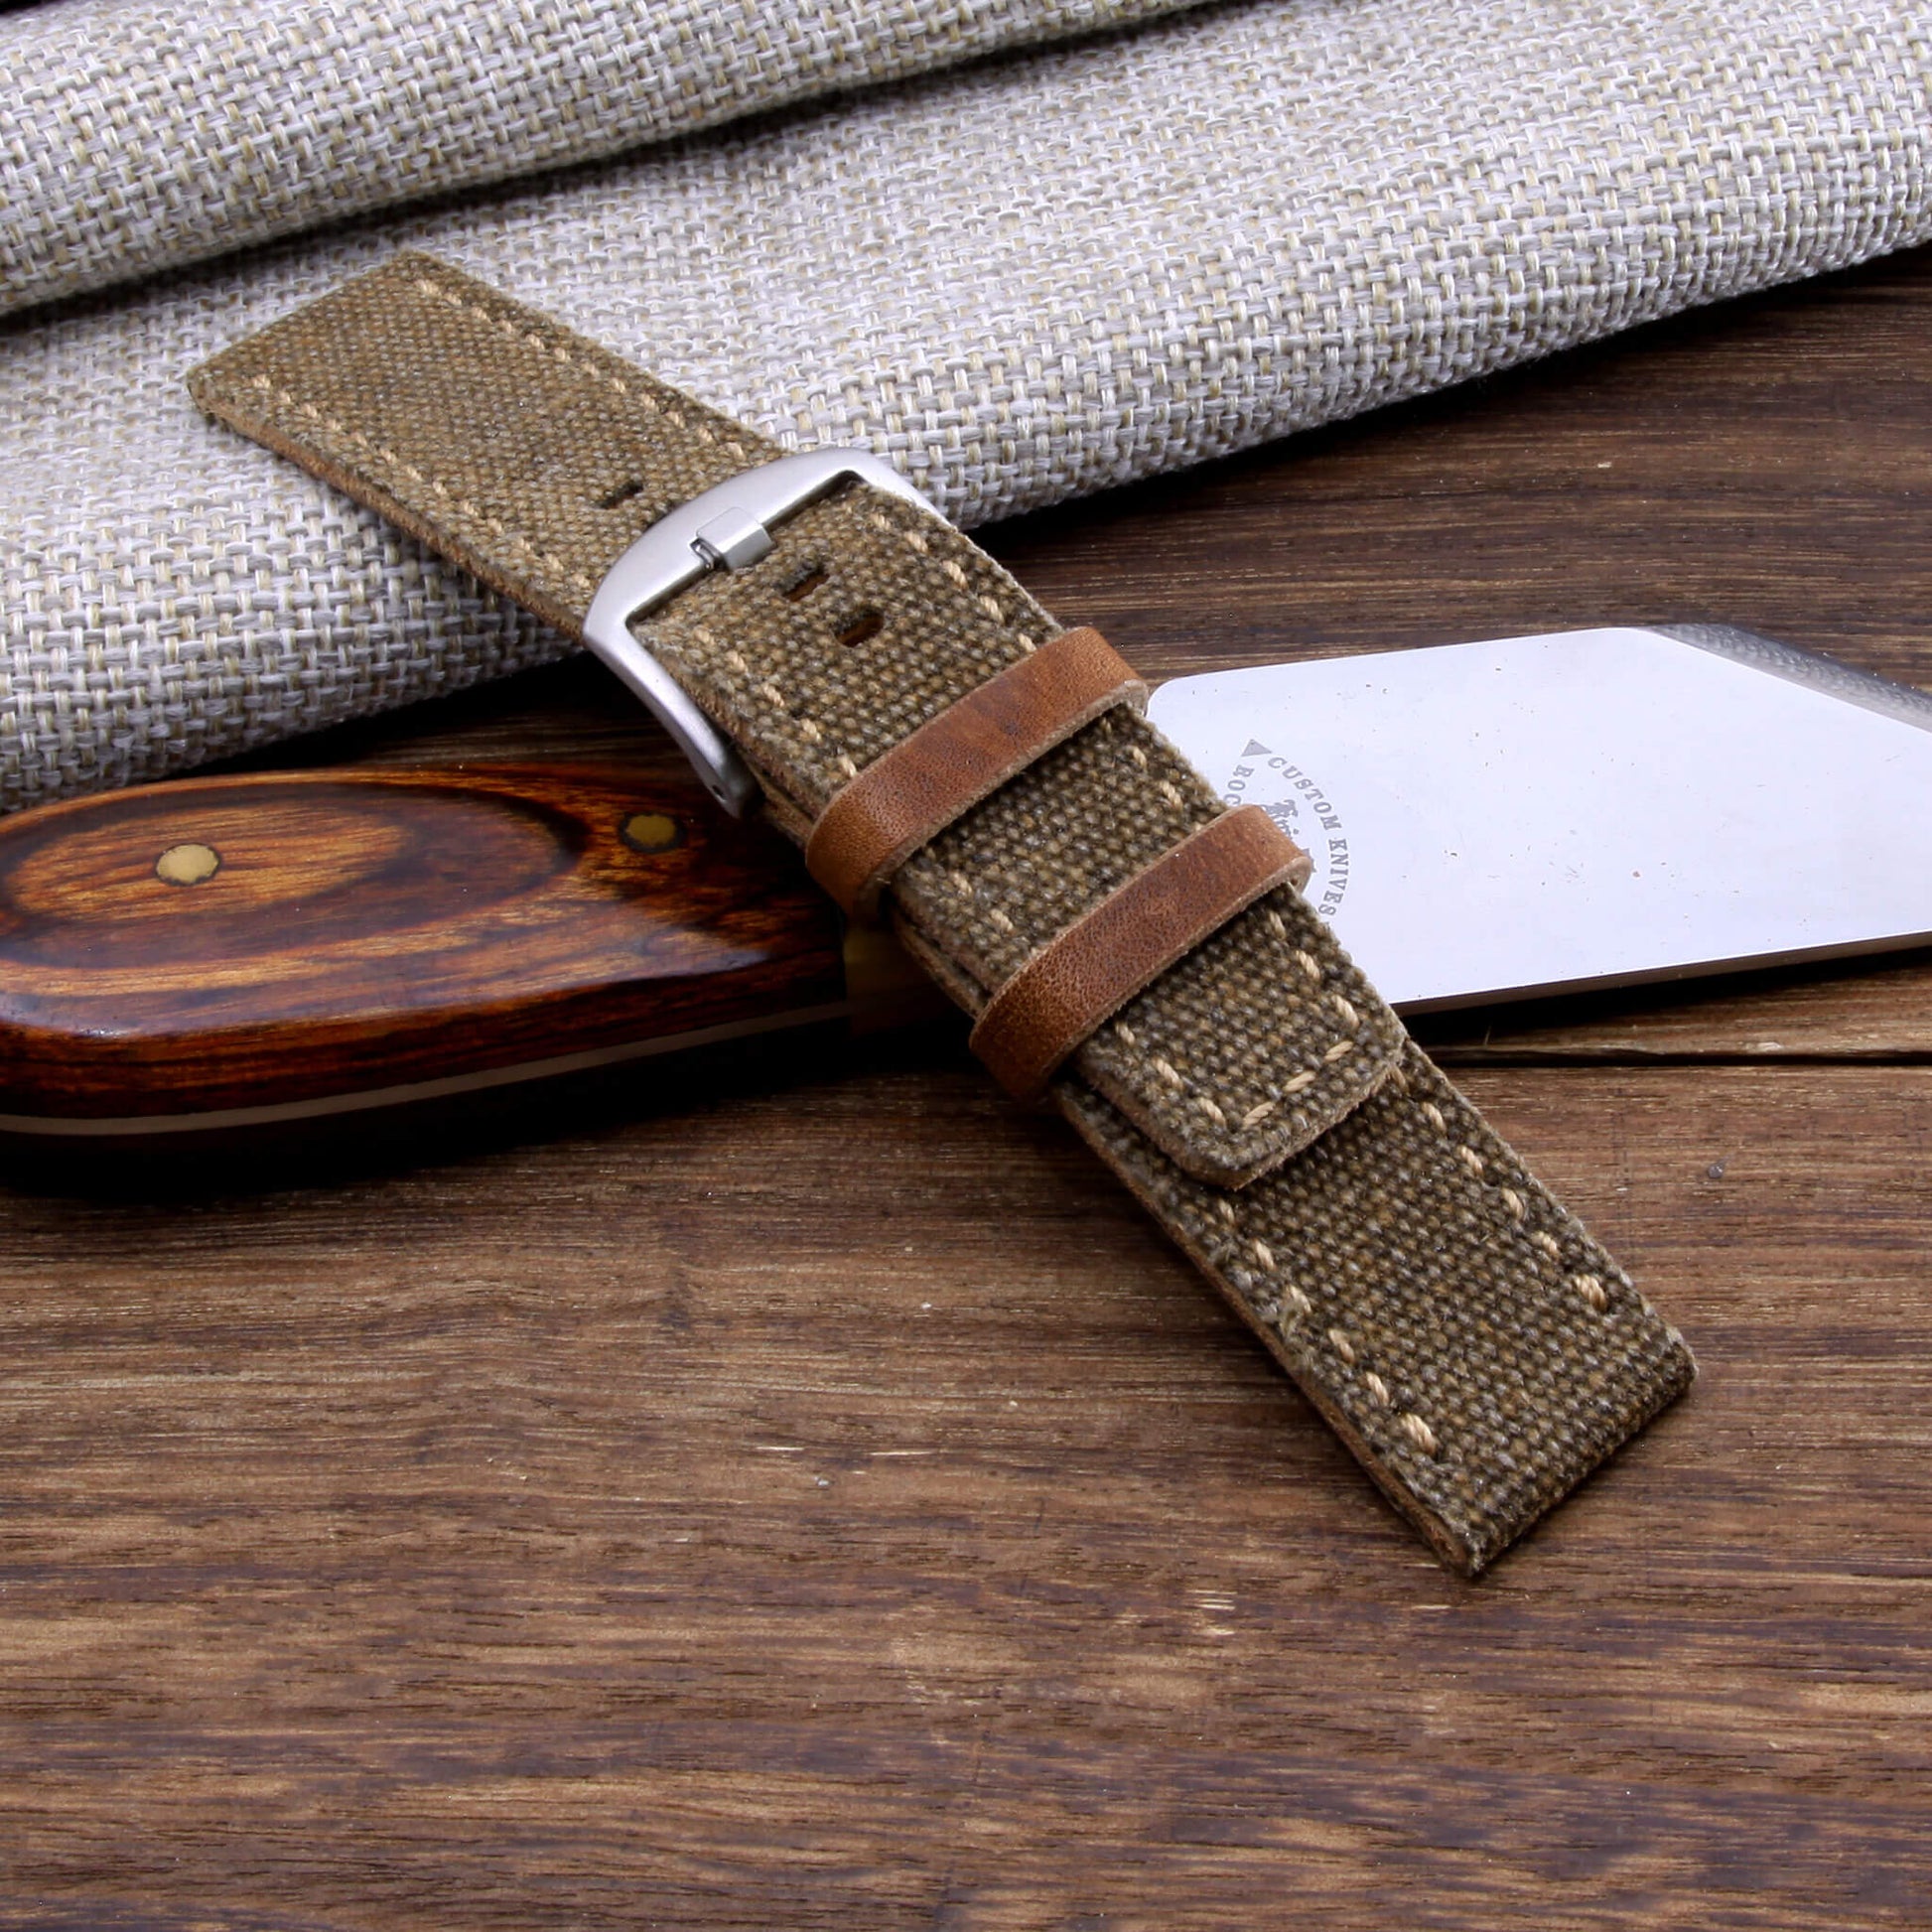 4th VIew of 2-Piece Full Stitch Leather Watch Strap, made with Rustic Brown Canvas and Italian veg-tanned leather lining, handcrafted by Cozy Handmade